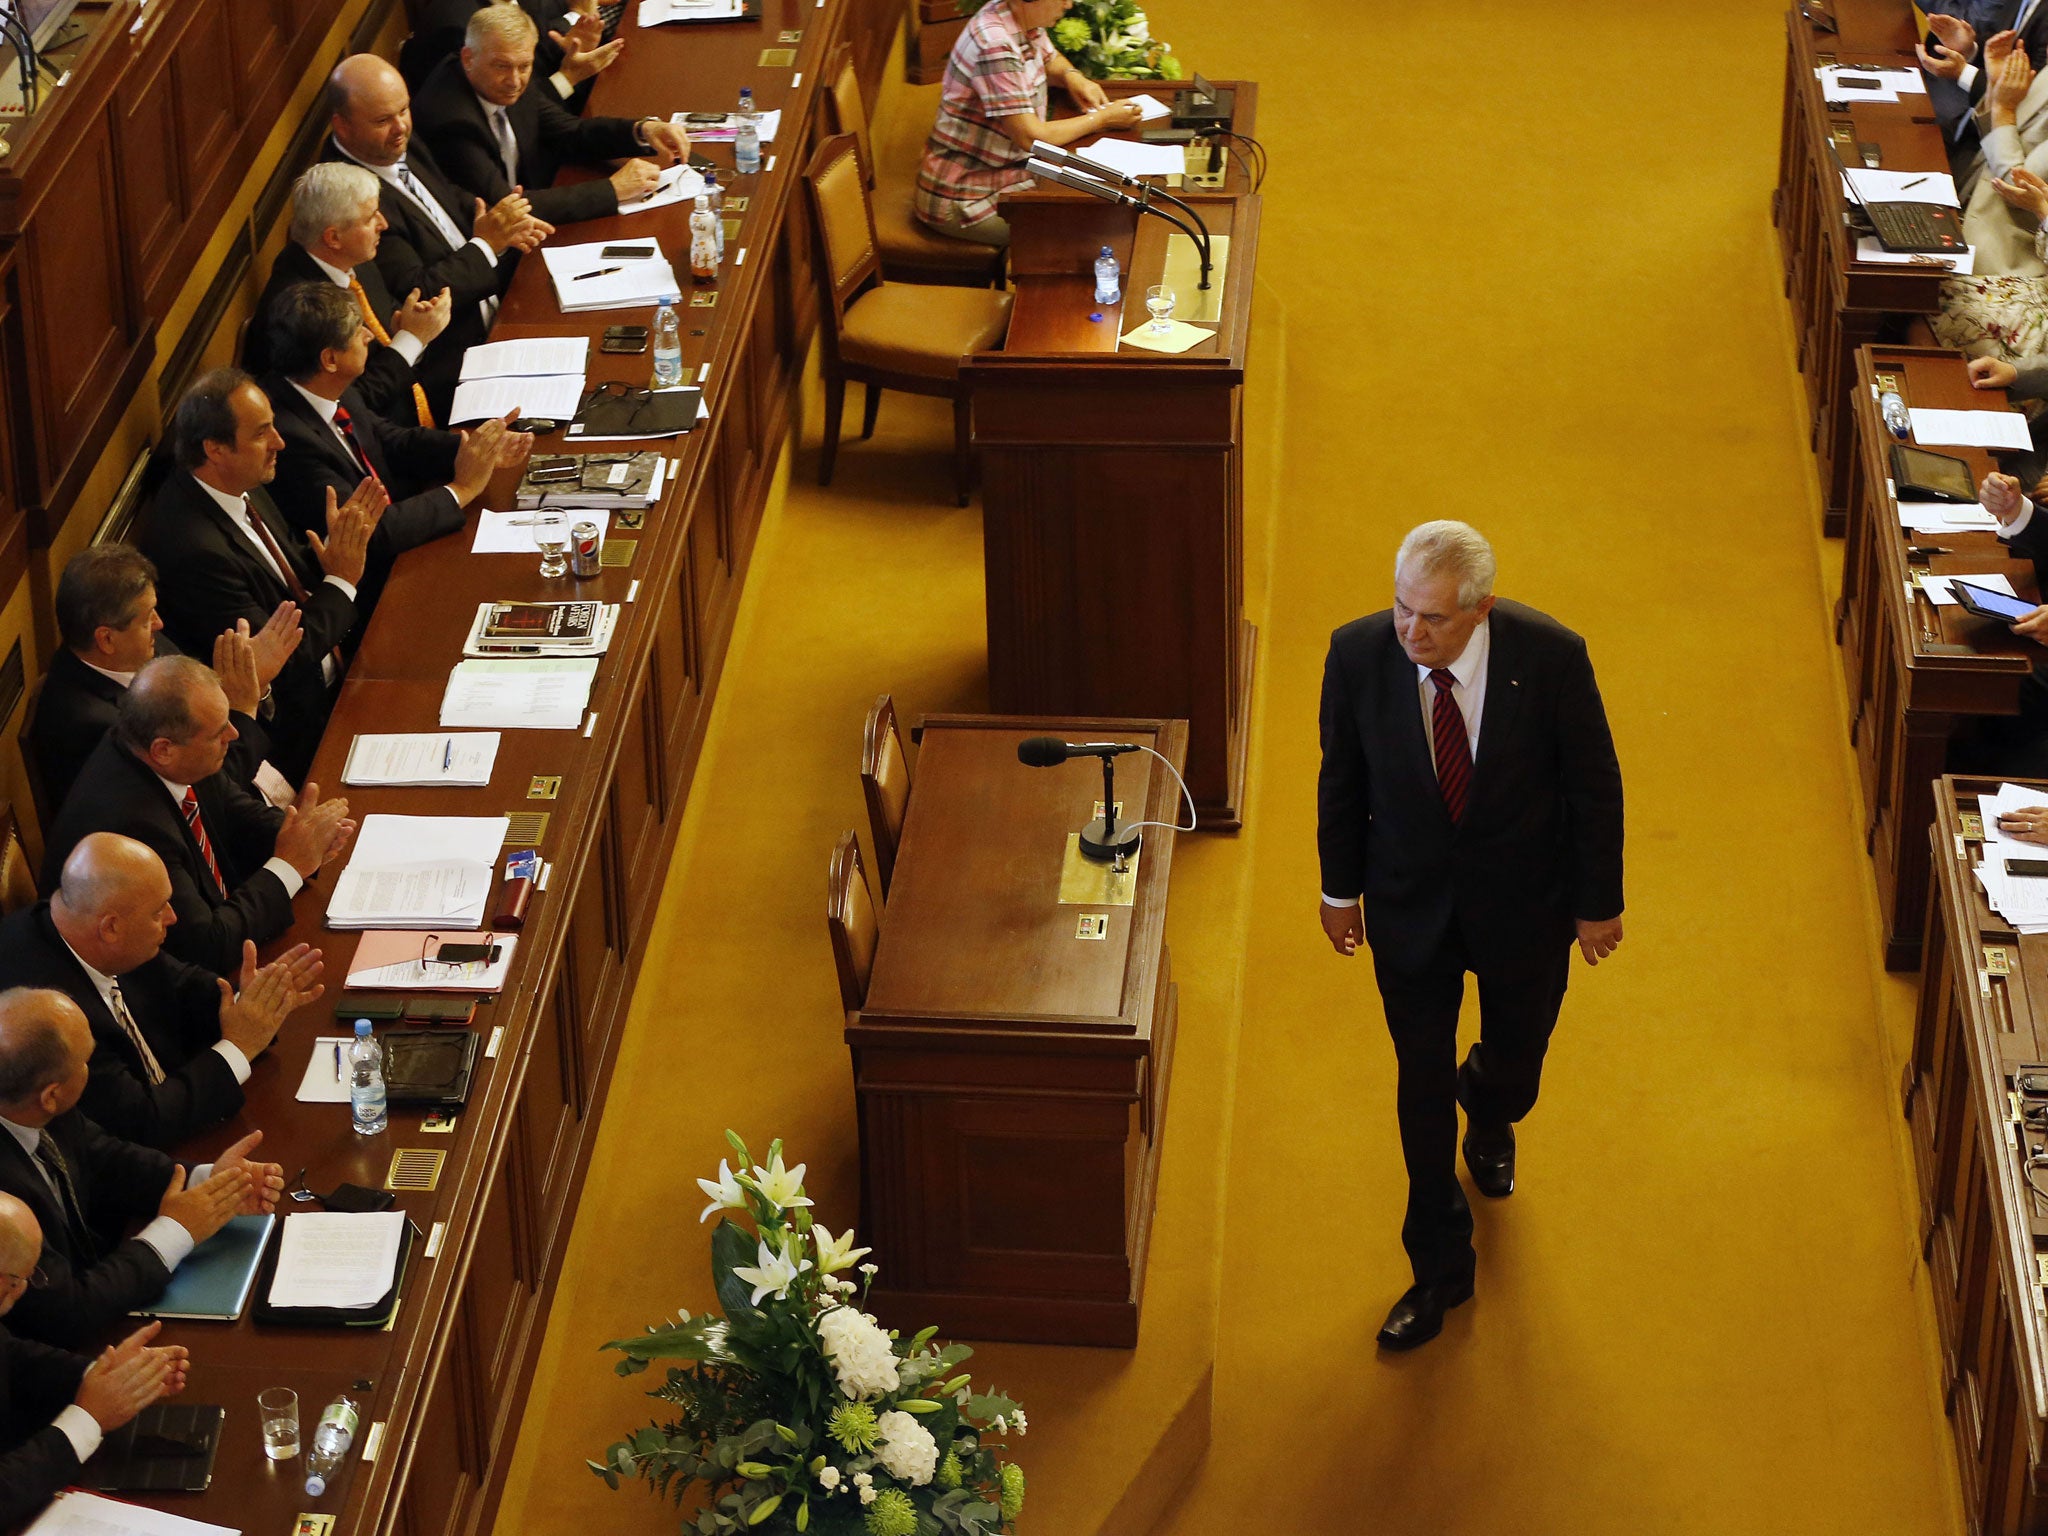 Milos Zeman walks past representatives after delivering a speech during a Parliament session in Prague. Czech Republic's Parliament gathered for a confidence vote for a newly appointed government led by Jiri Rusnok